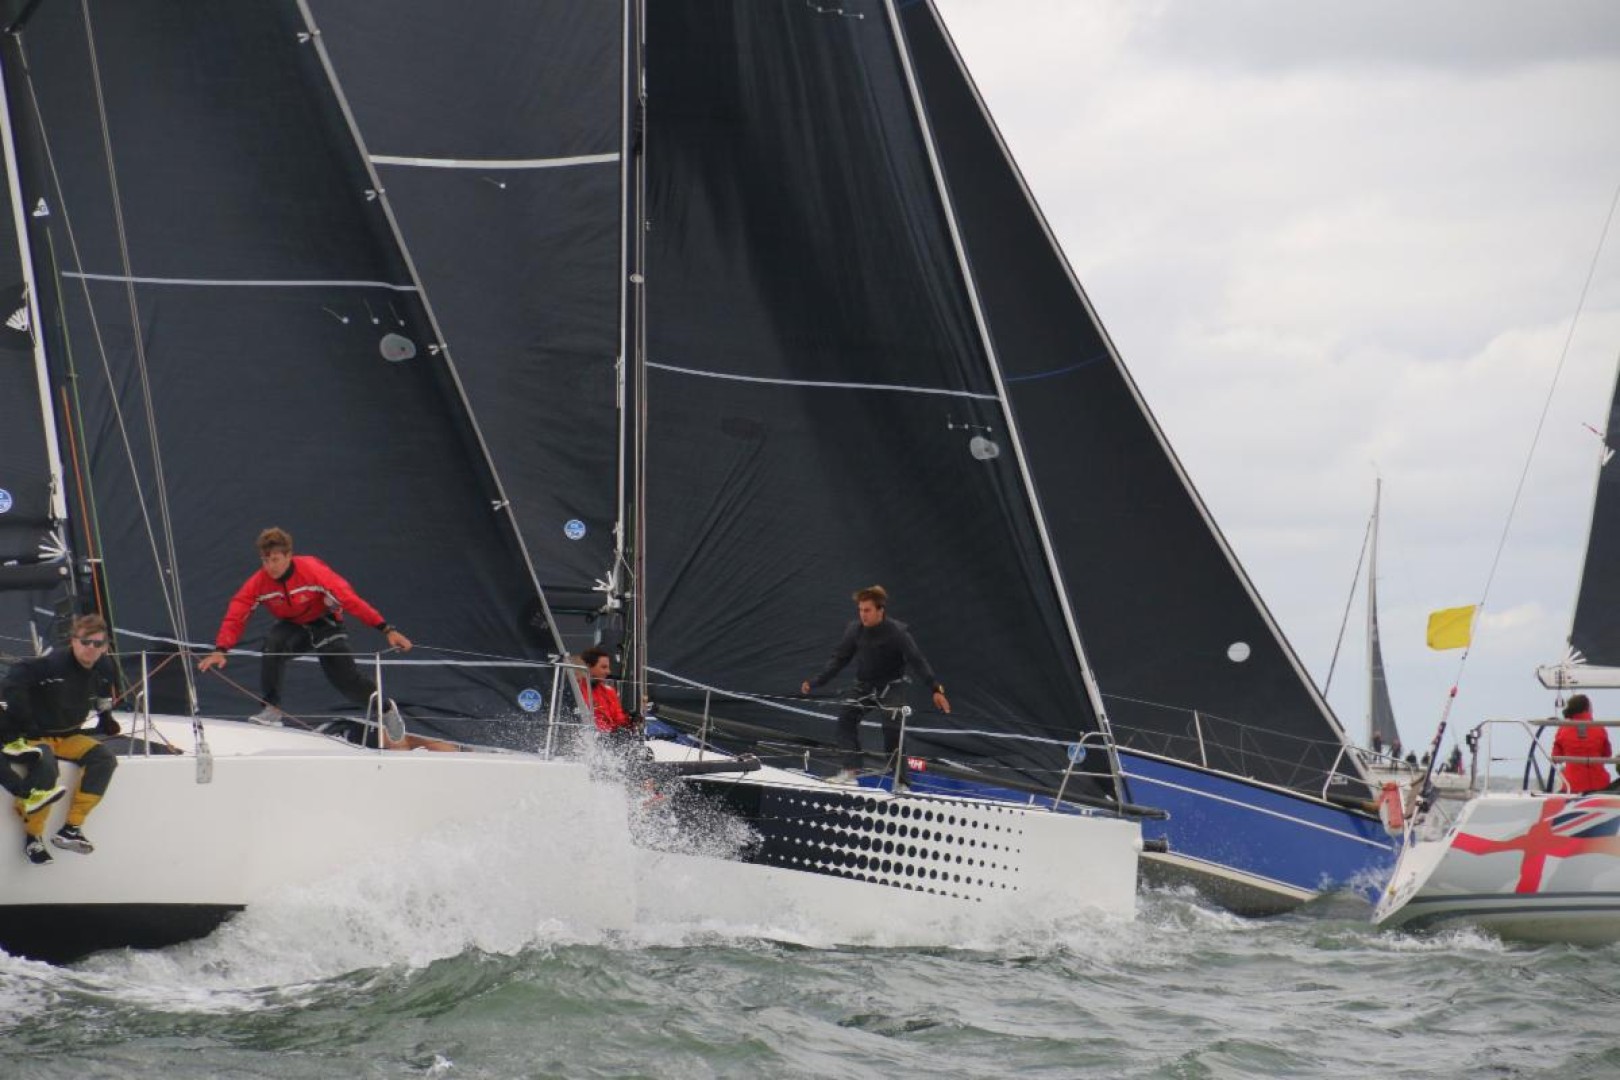 A thrilling start line for IRC 2 in the second day of racing at the IRC Europeans in Breskens   Image: Ineke Peltzer